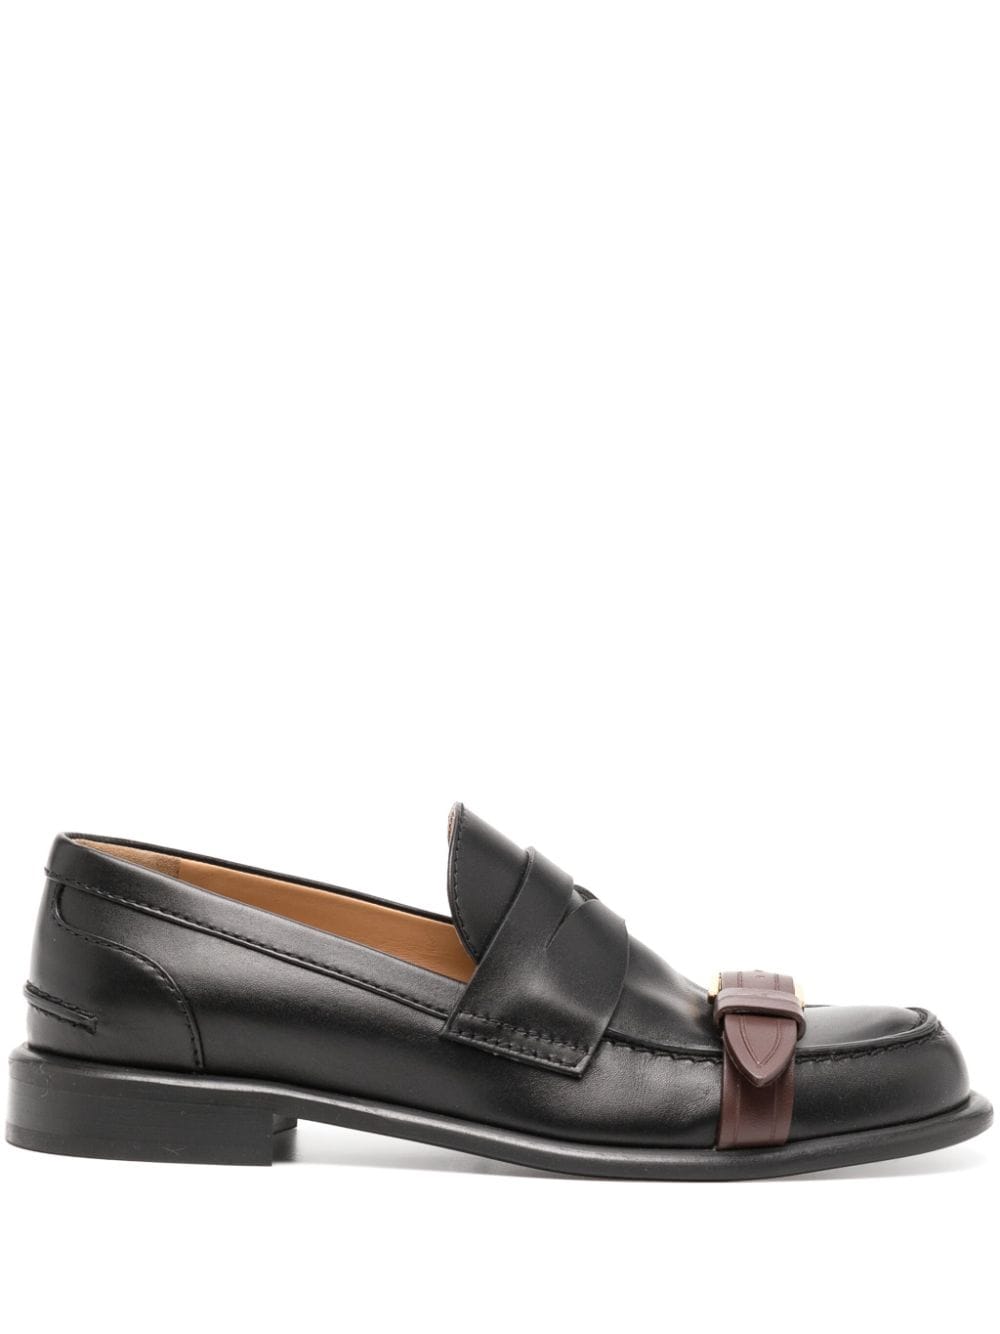 JW Anderson Animated buckle-detail leather loafers - Black von JW Anderson